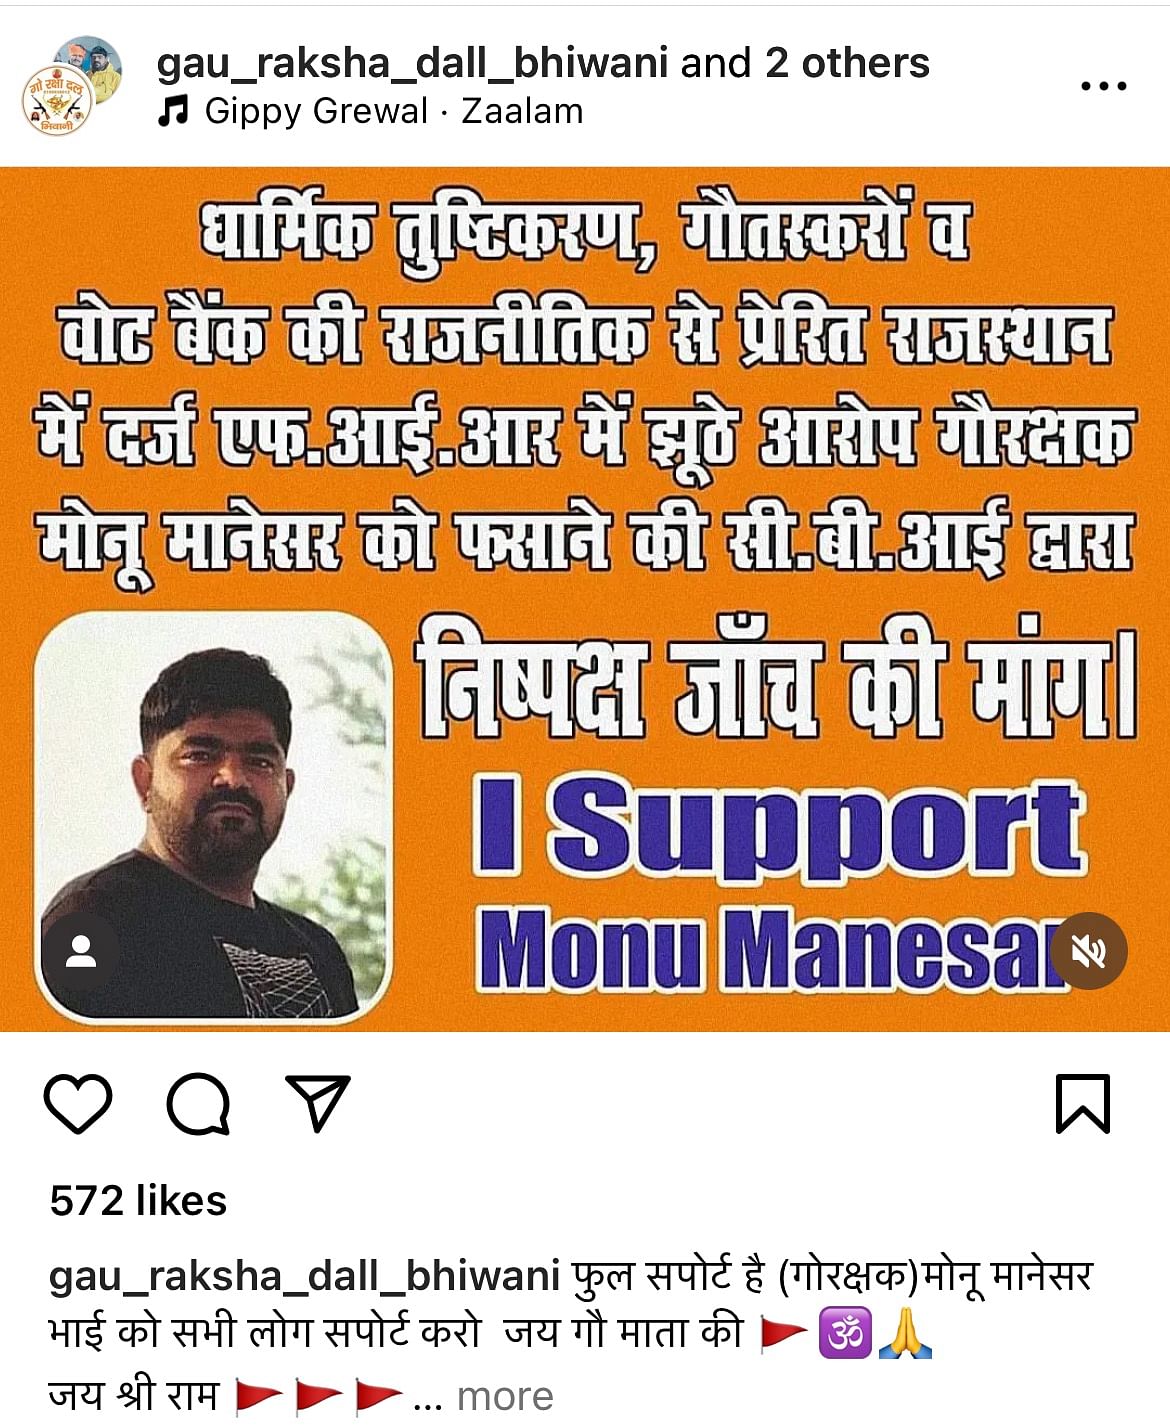 After Monu Manesar's arrest, Bajrang Dal members have expressed support for him, as well as disappointment in BJP.